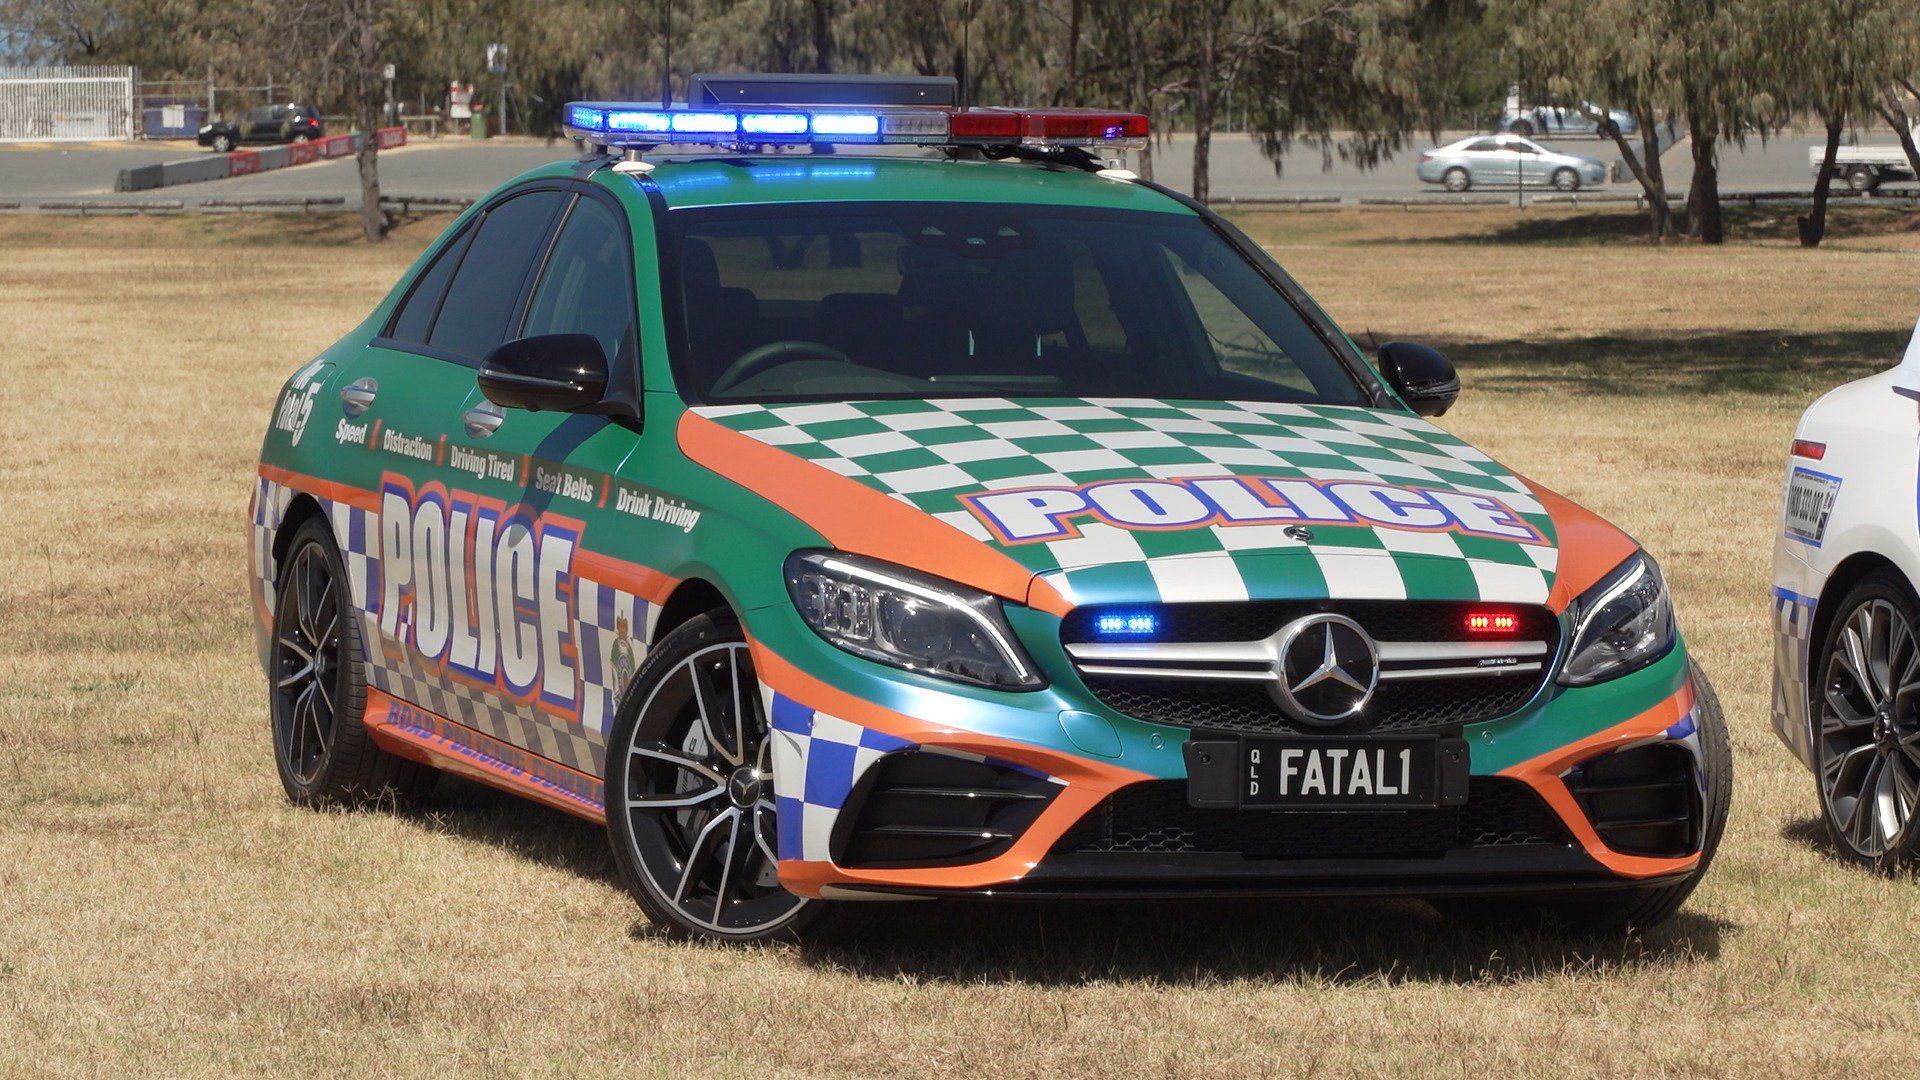 Queensland Police Joined A C Keating And To Launch Our Christmas Road Safety Campaign